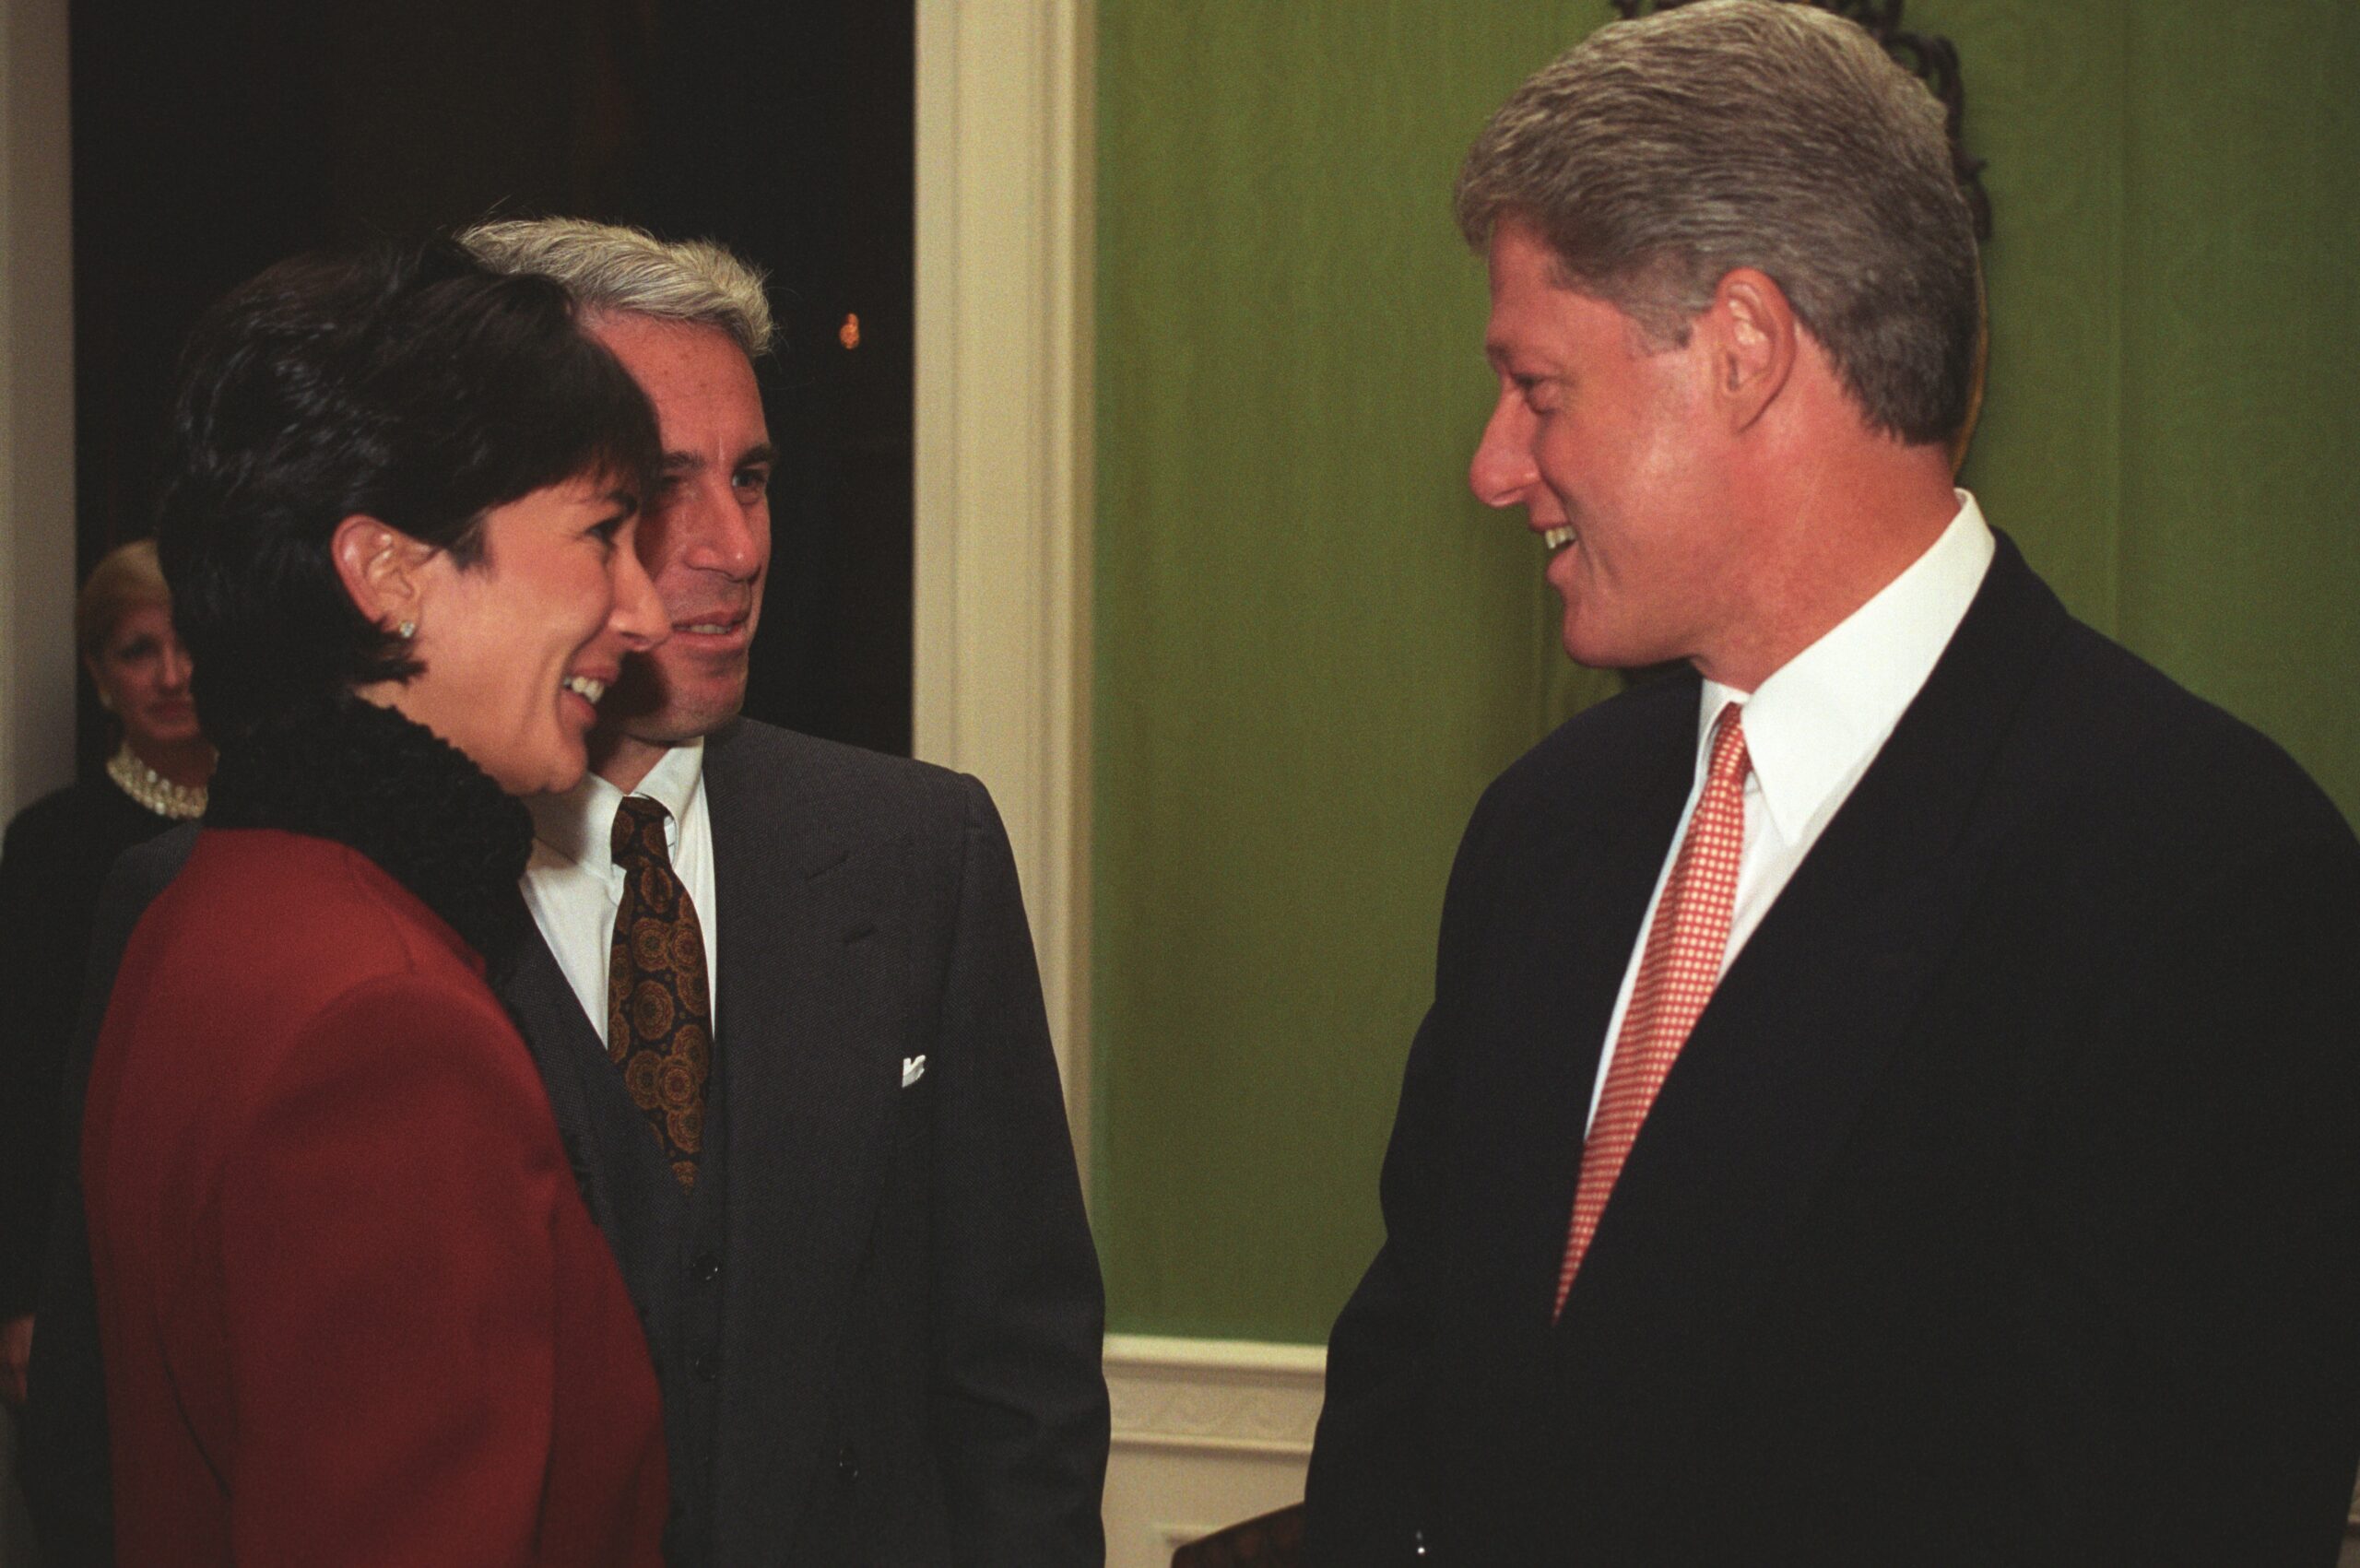 According to the William J. Clinton Presidential Library and Museum former US President Bill Clinton was photographed with Jeffrey Epstein and Ghislaine Maxwell on September 29 1993 at the White House.